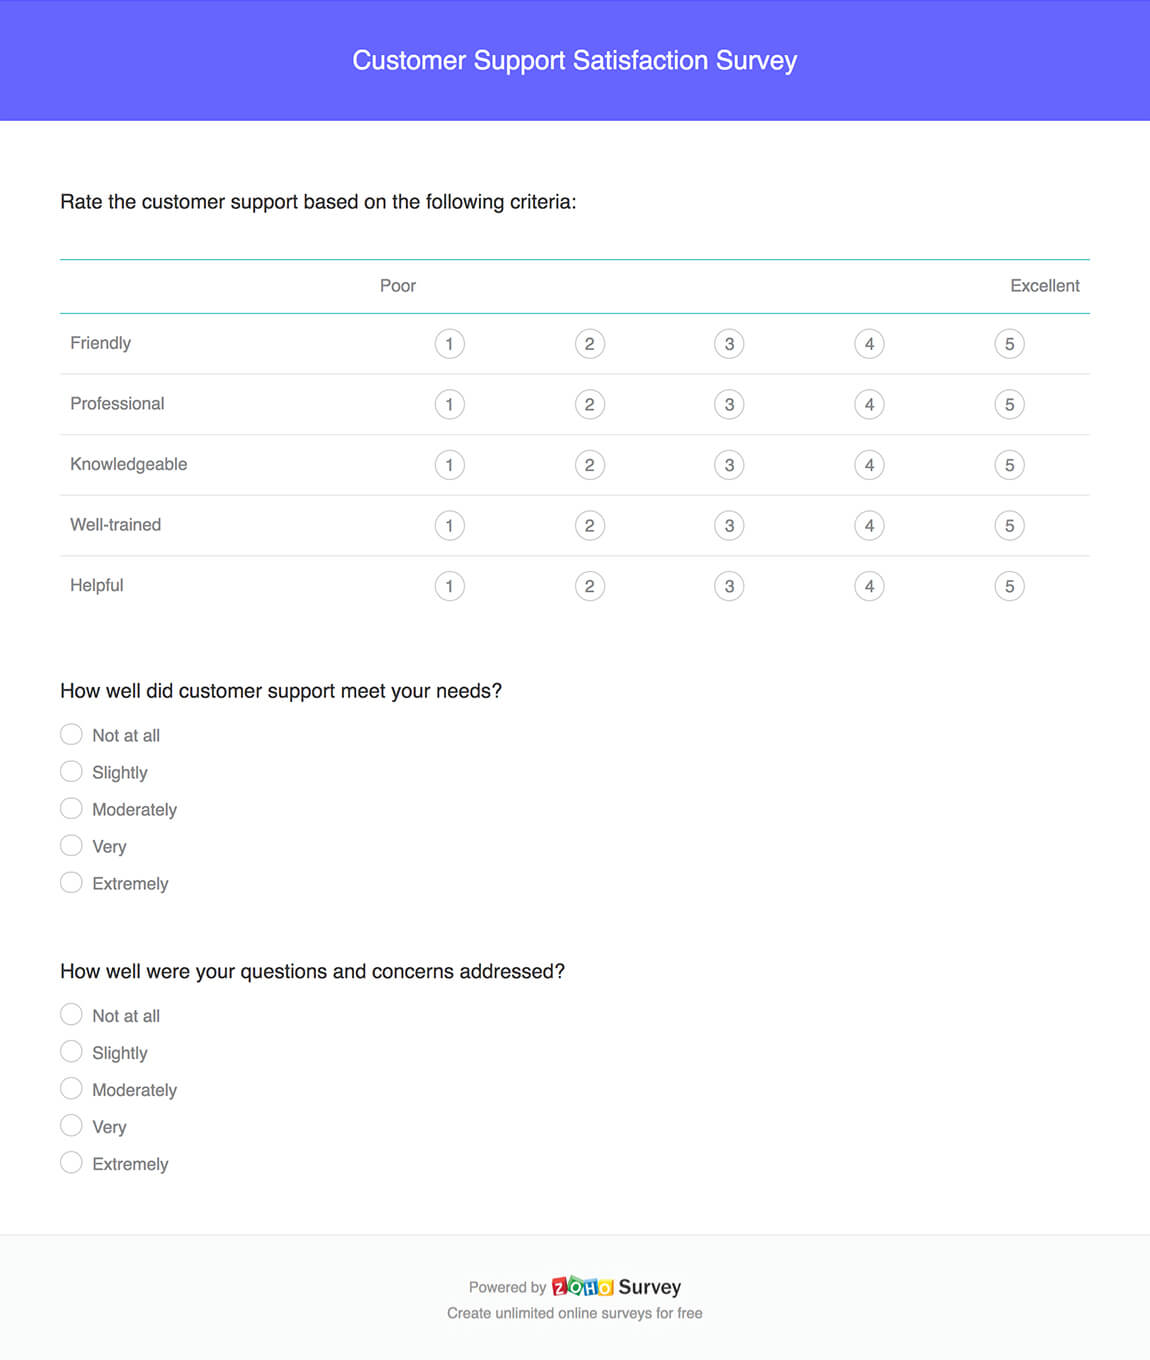 Customer support satisfaction survey questionnaire template